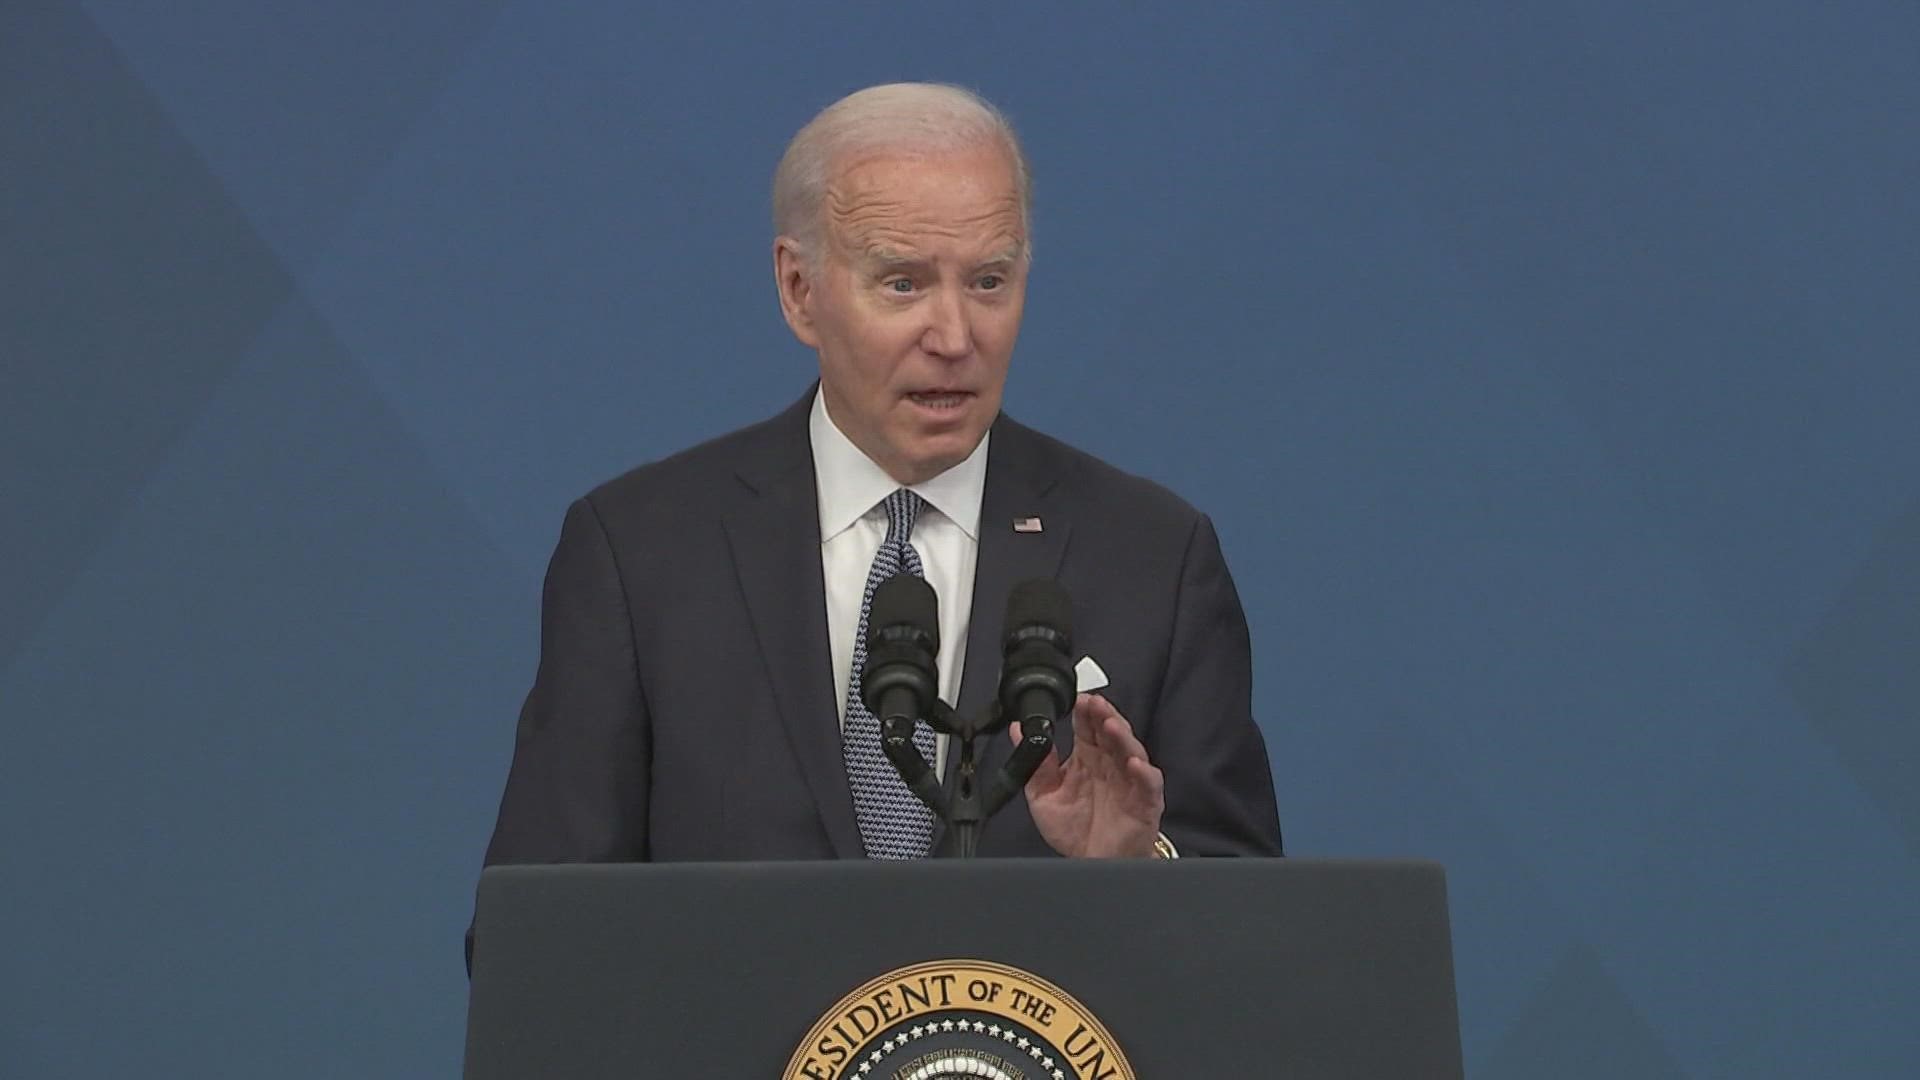 Biden told reporters at the White House that he was “cooperating fully and completely” with a Justice Department investigation.